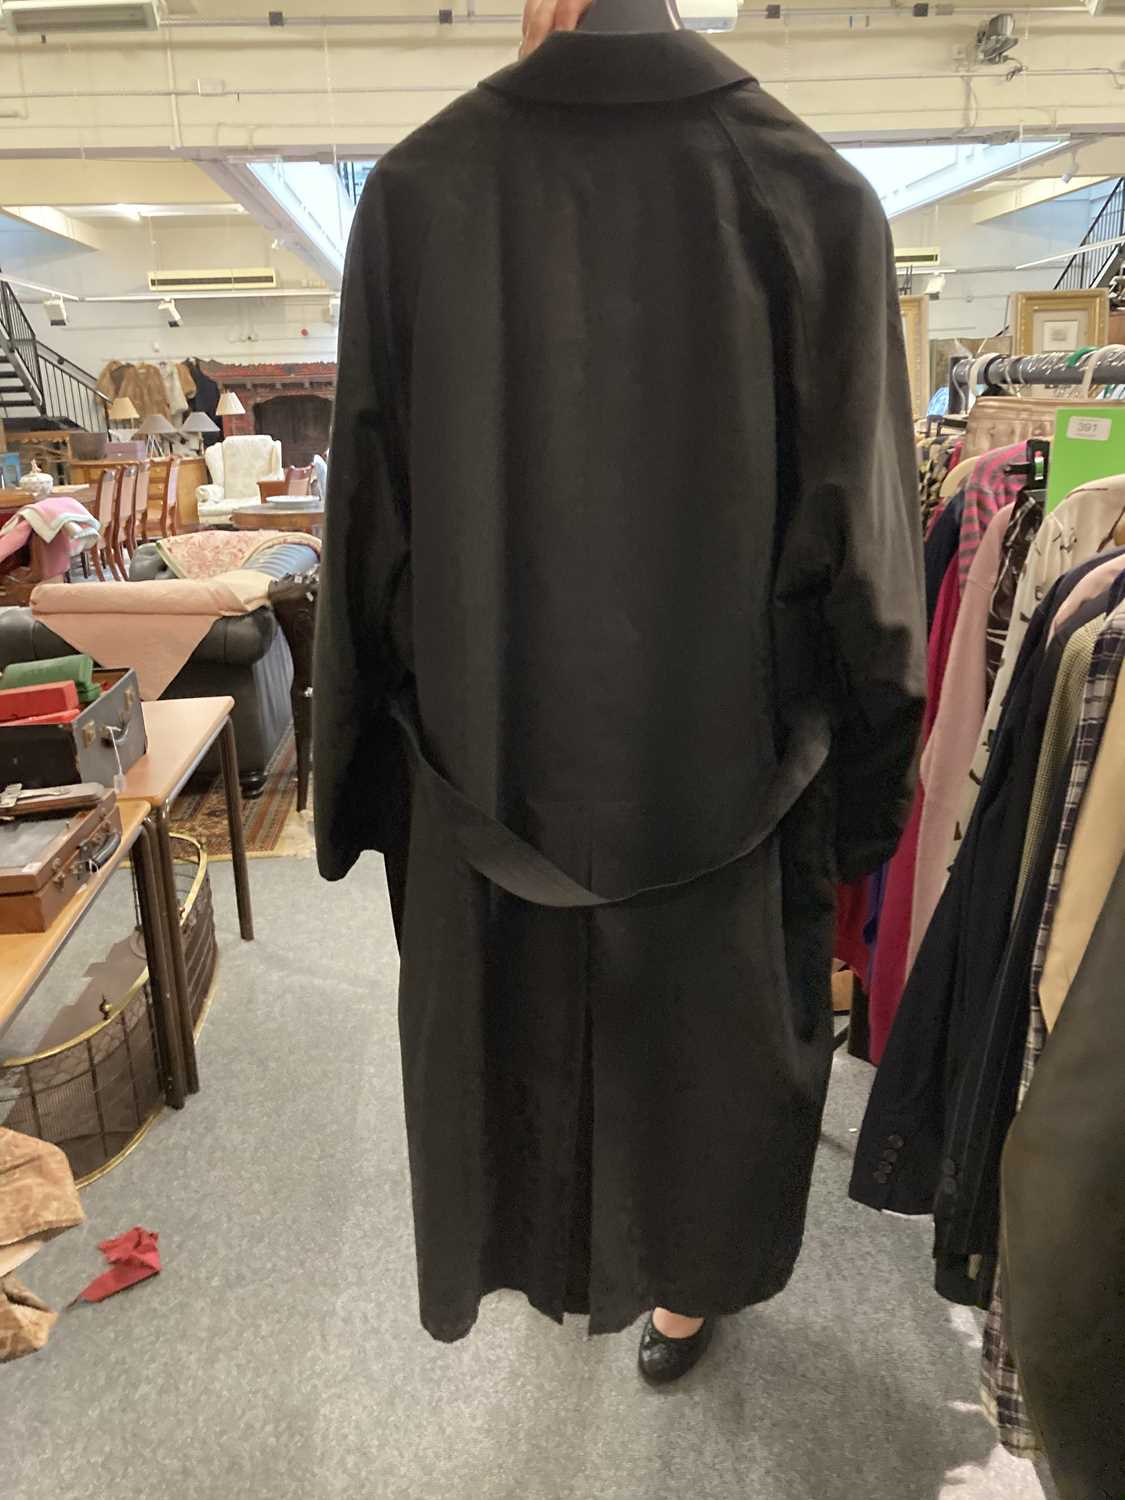 Ralph Lauren Black Trench Coat with button fastening, belt tie, side pockets (size 44 R), and a - Image 2 of 5